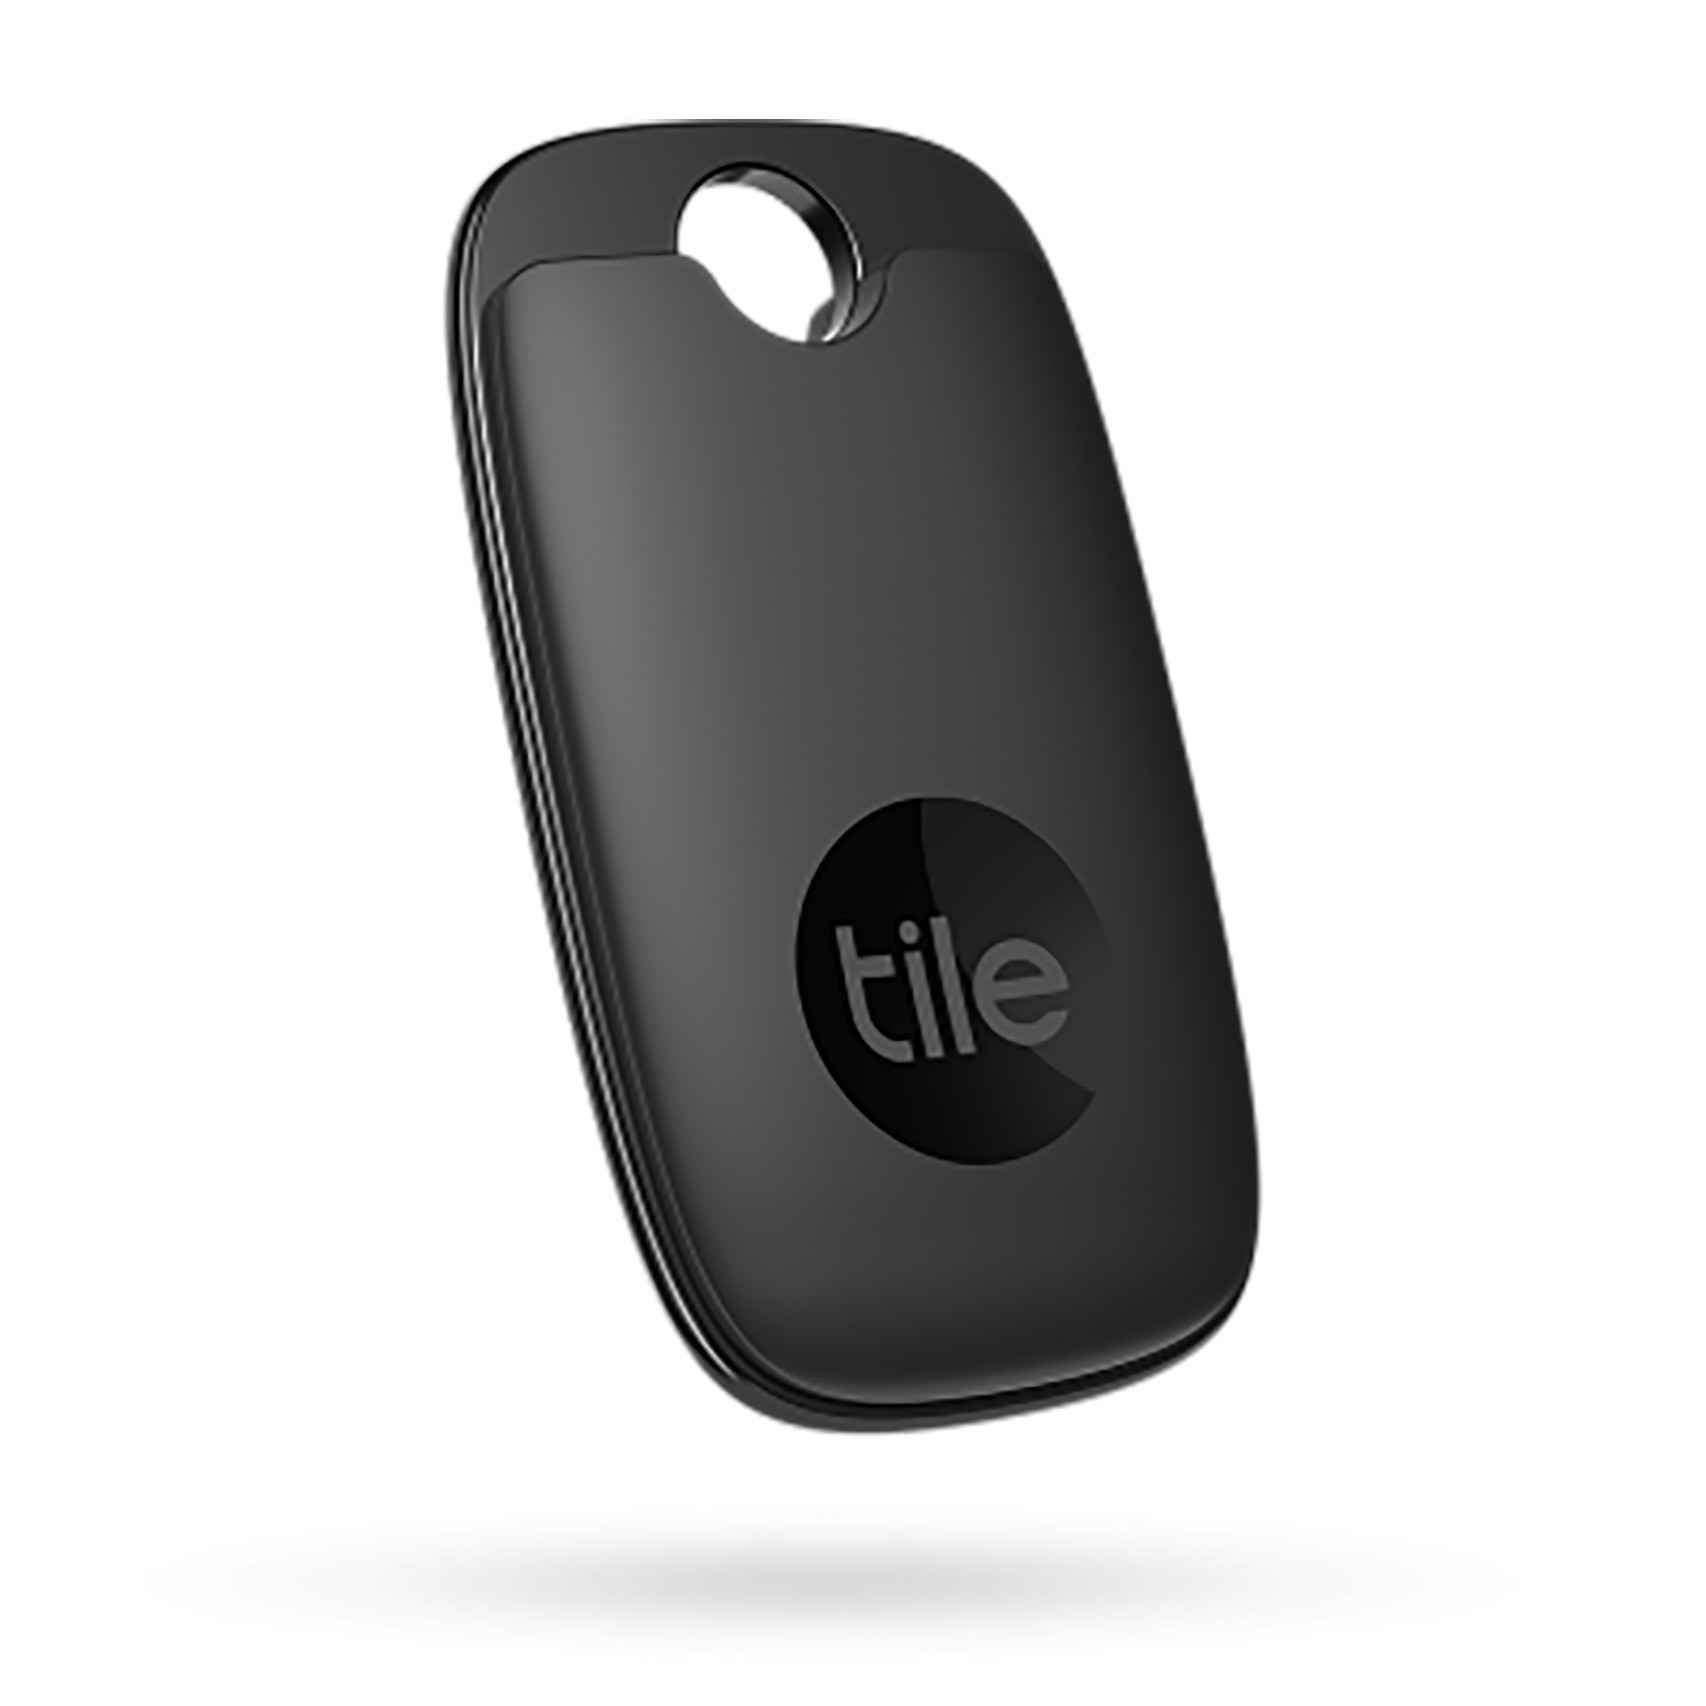 Tile Sticker is another of its trackers